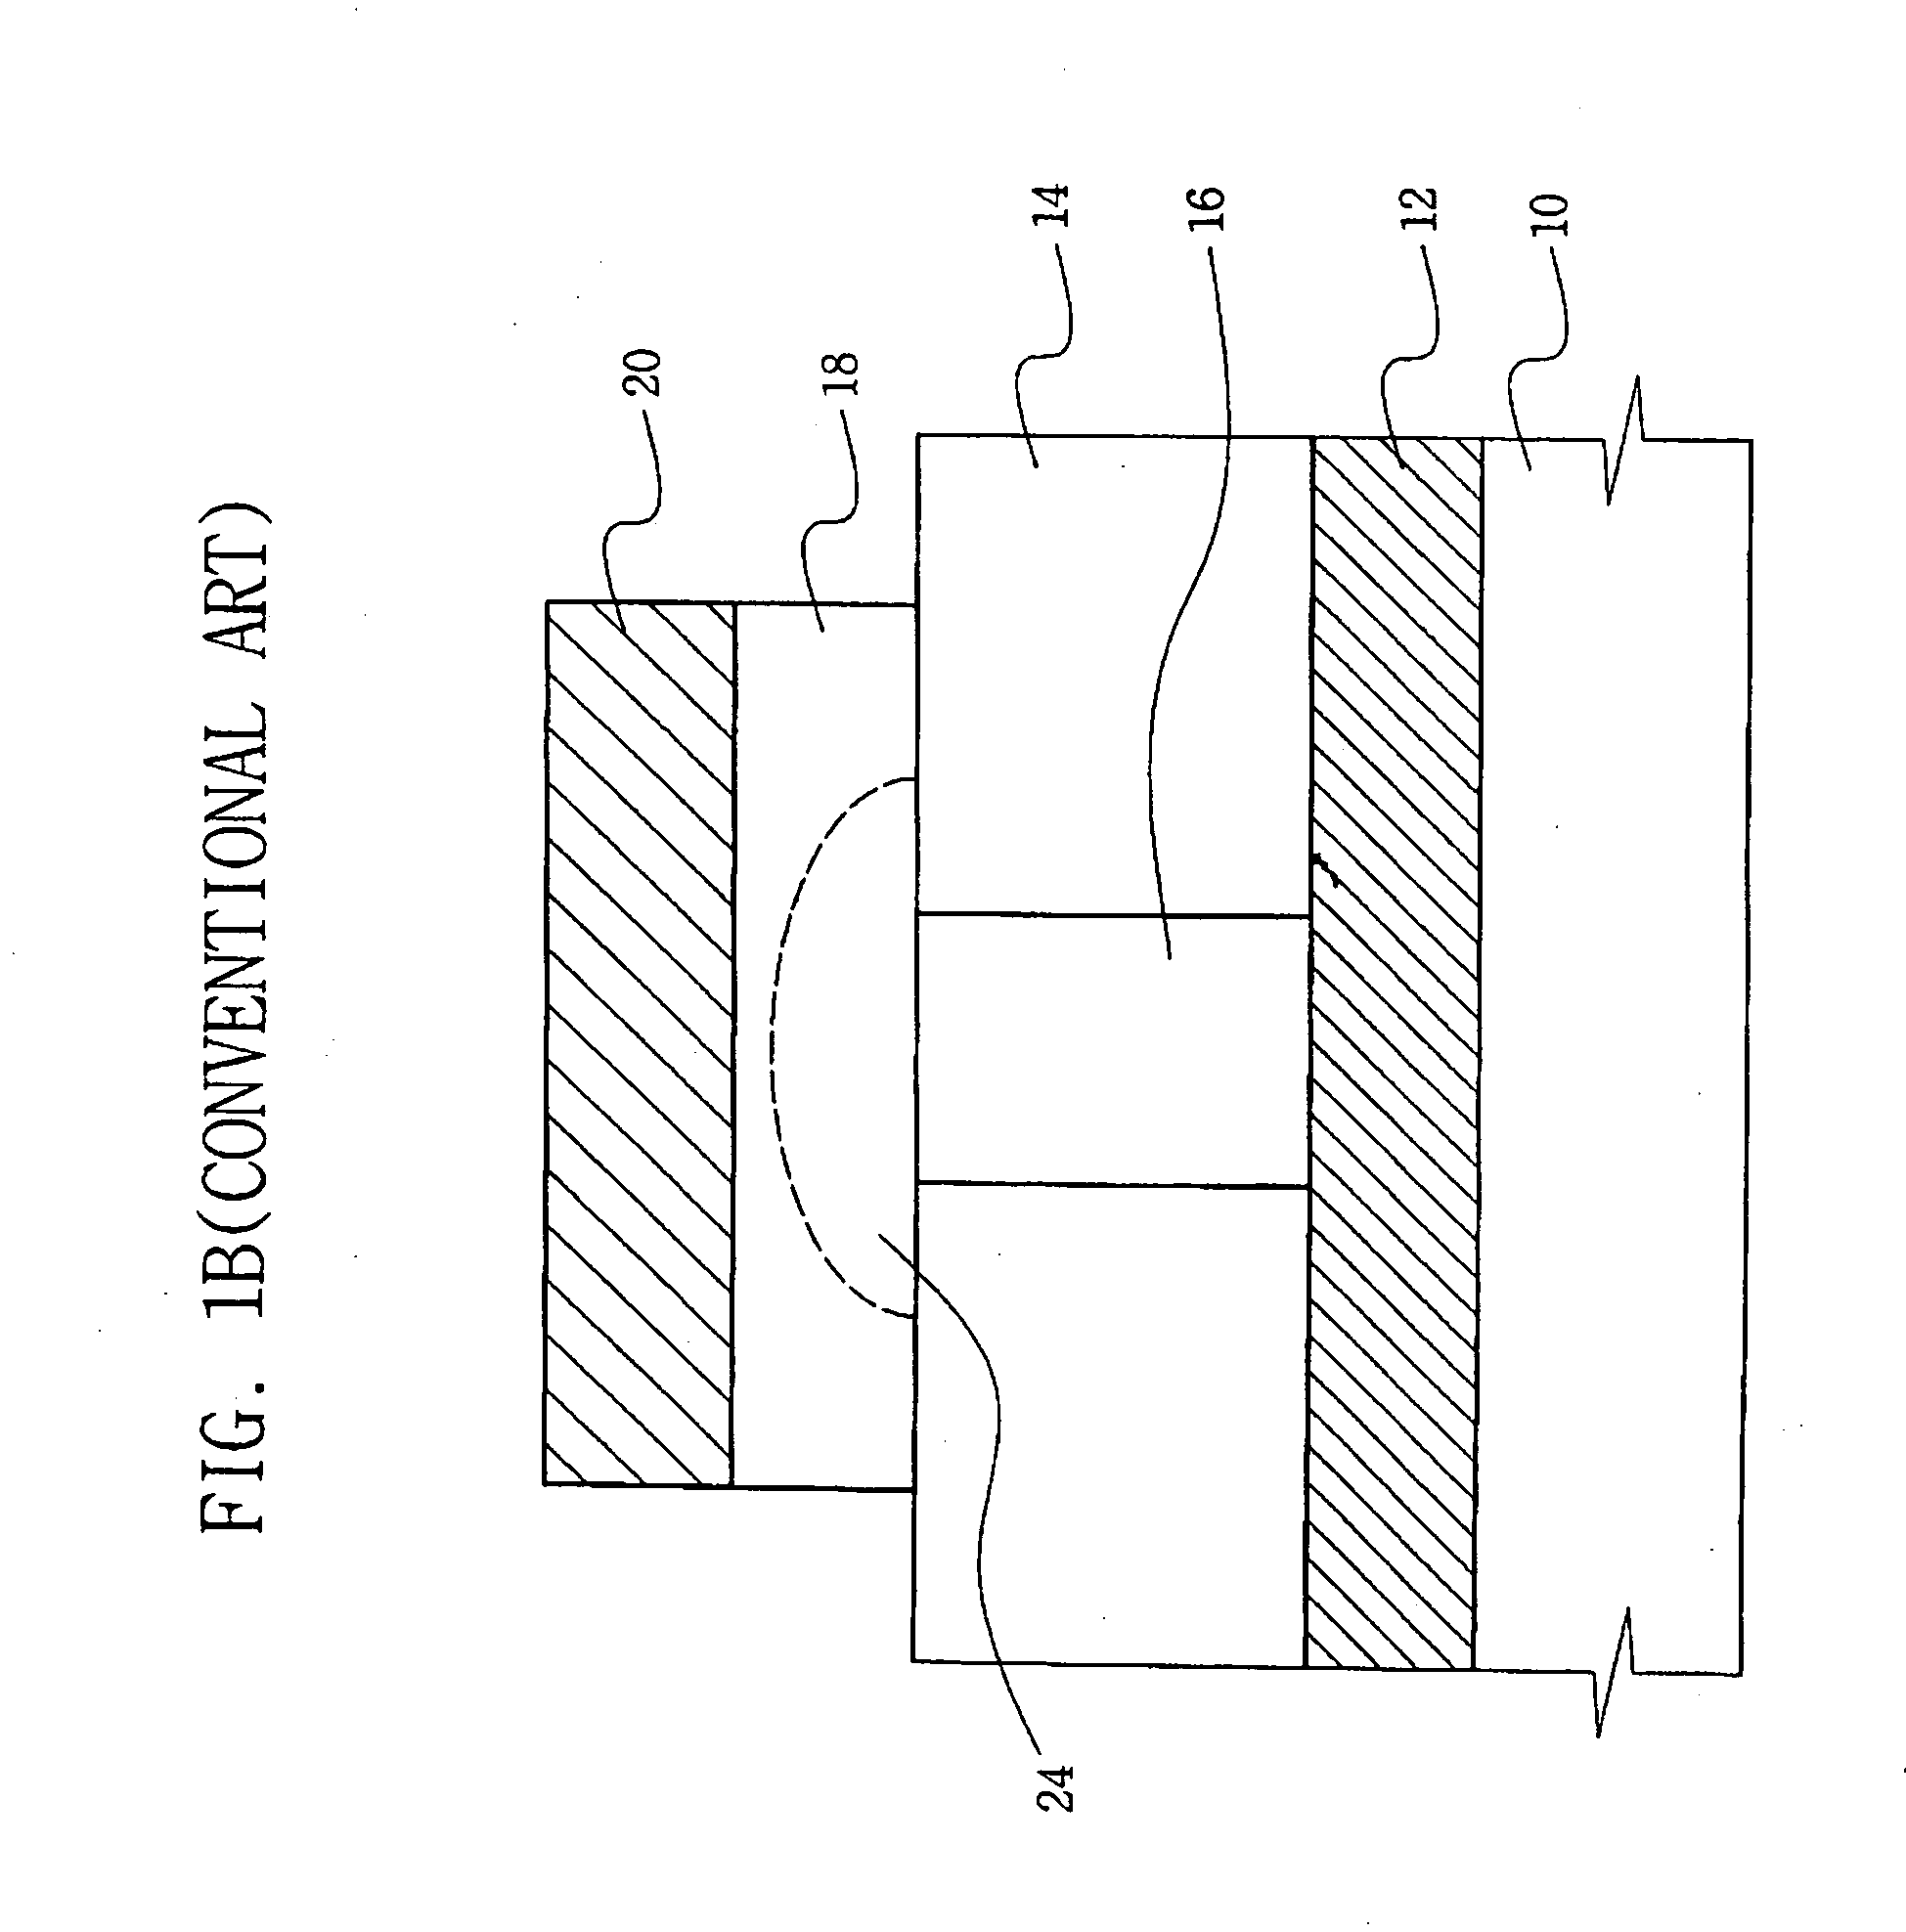 Phase-change memory device and methods of fabricating the same